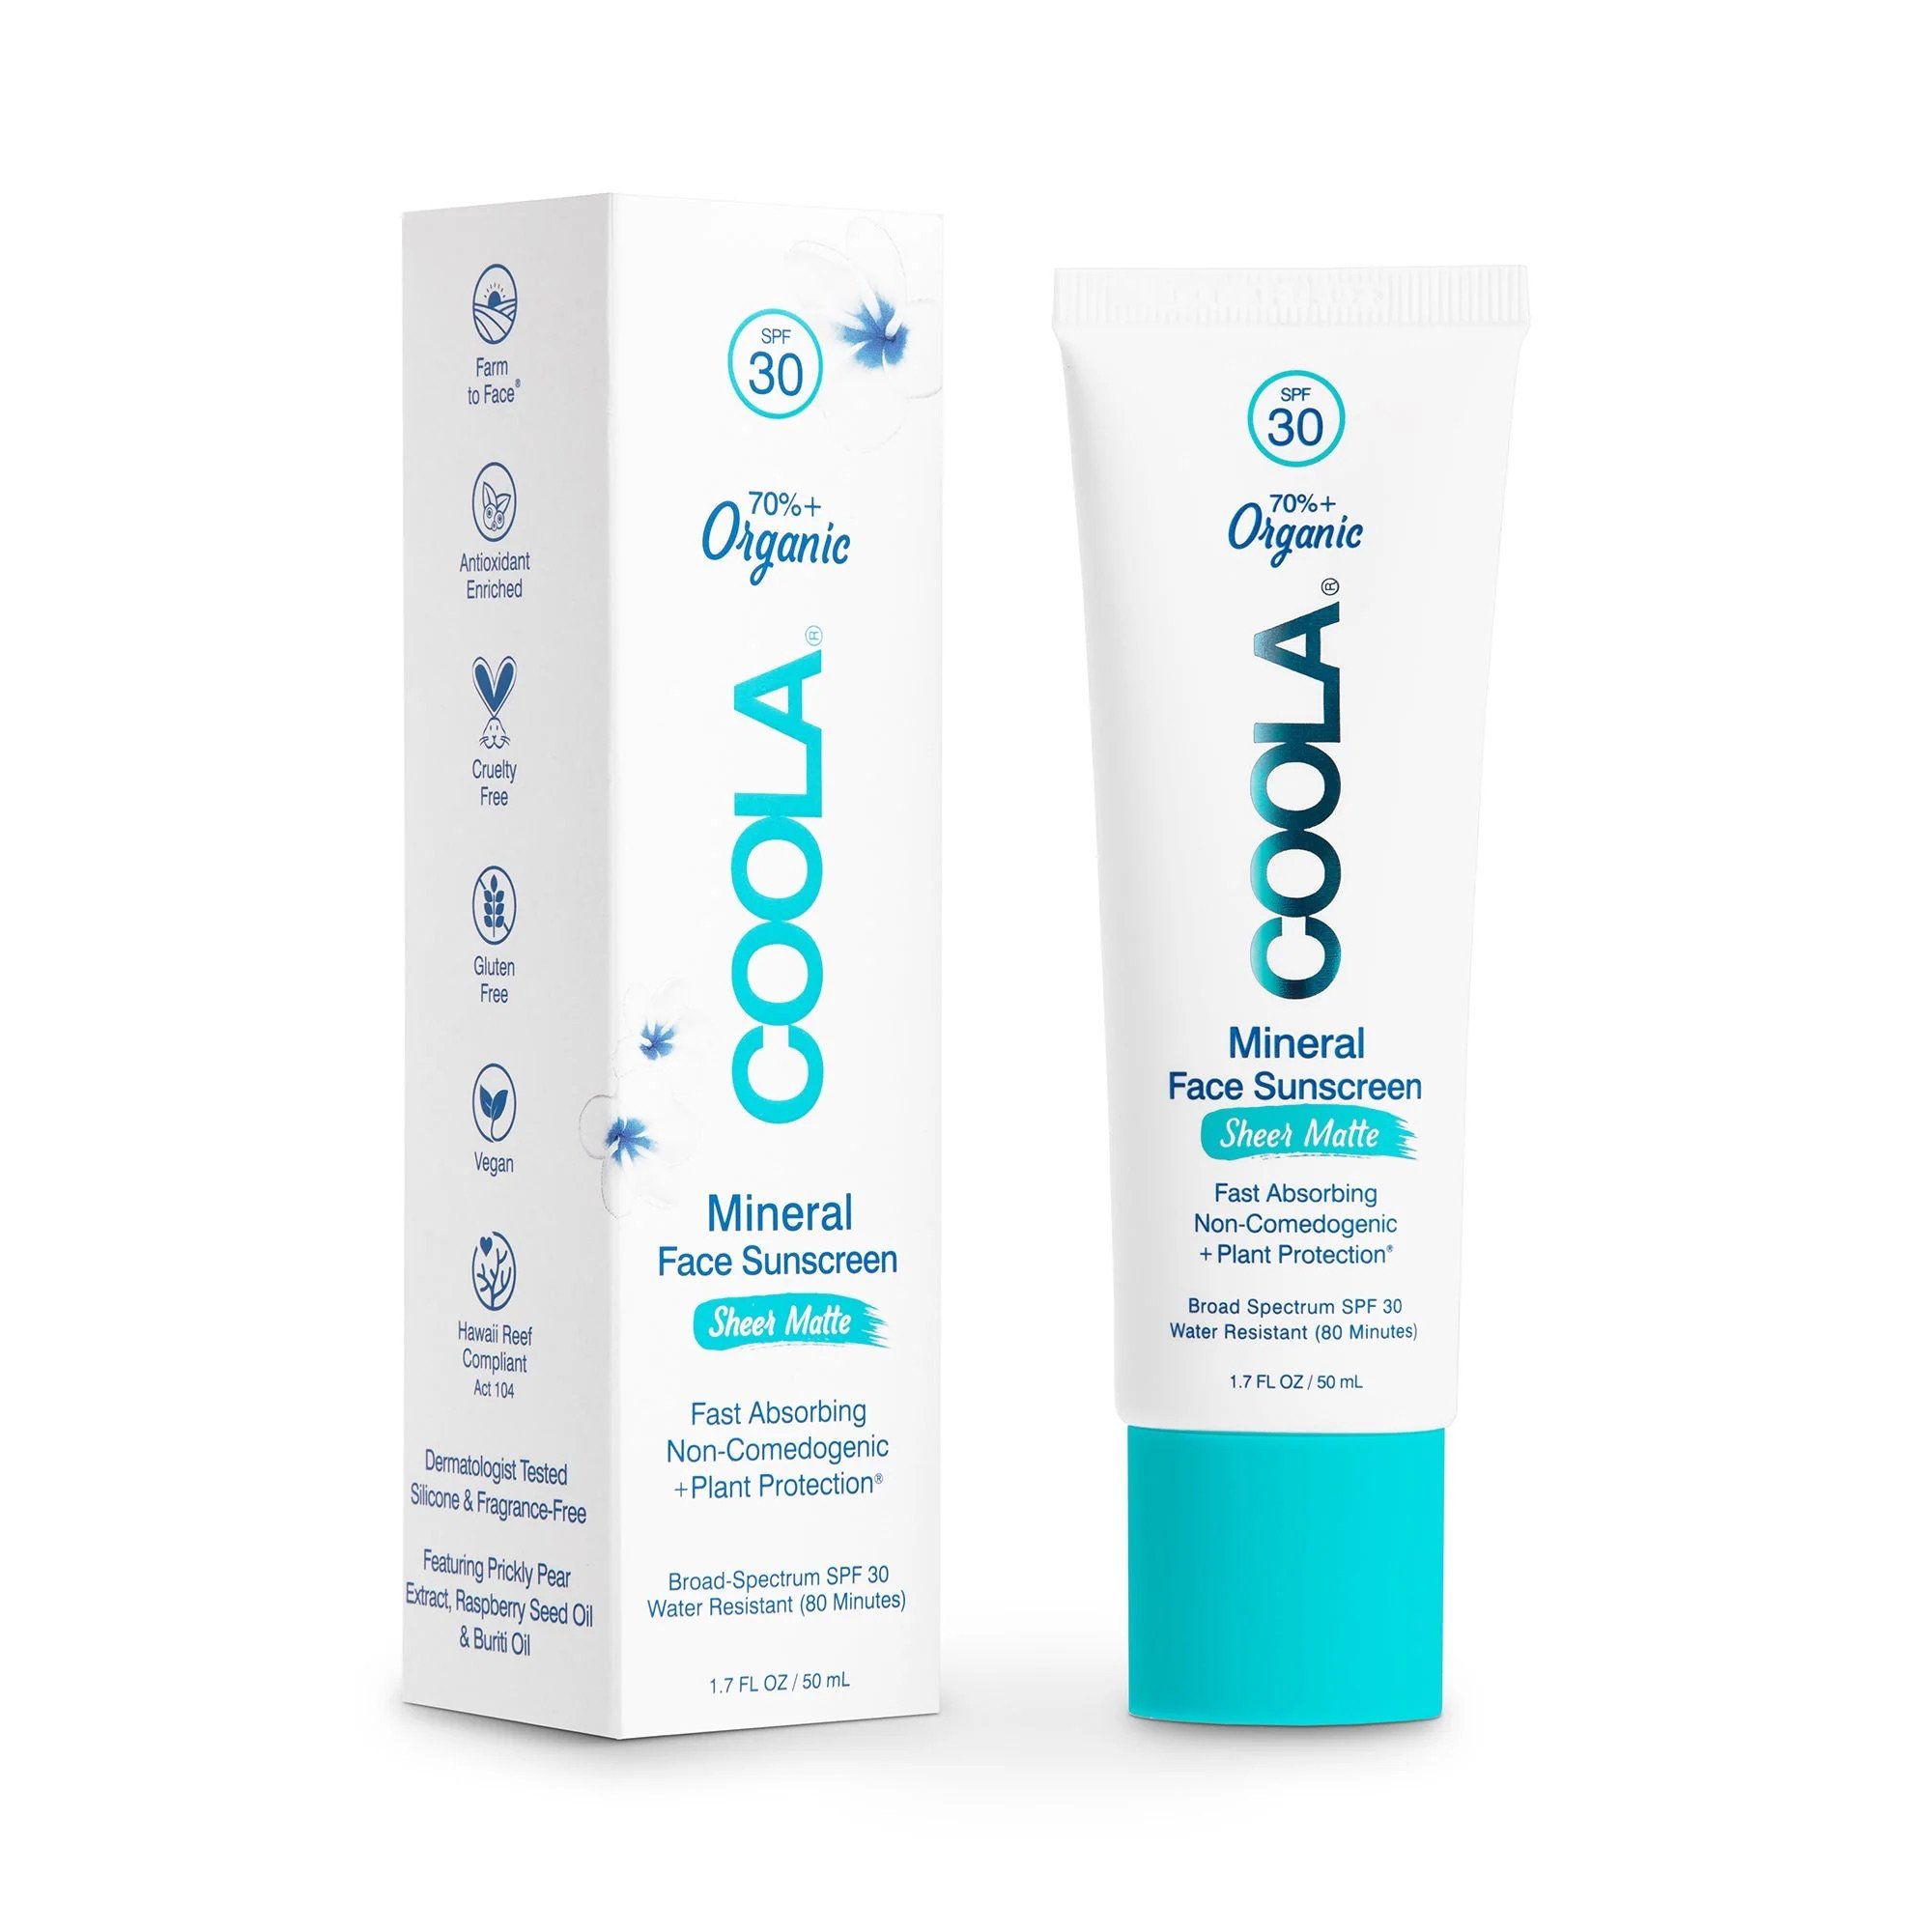 COOLA Mineral Face Organic Tinted Sunscreen Lotion, Sheer Matte, SPF 30 – 1.7 fl oz